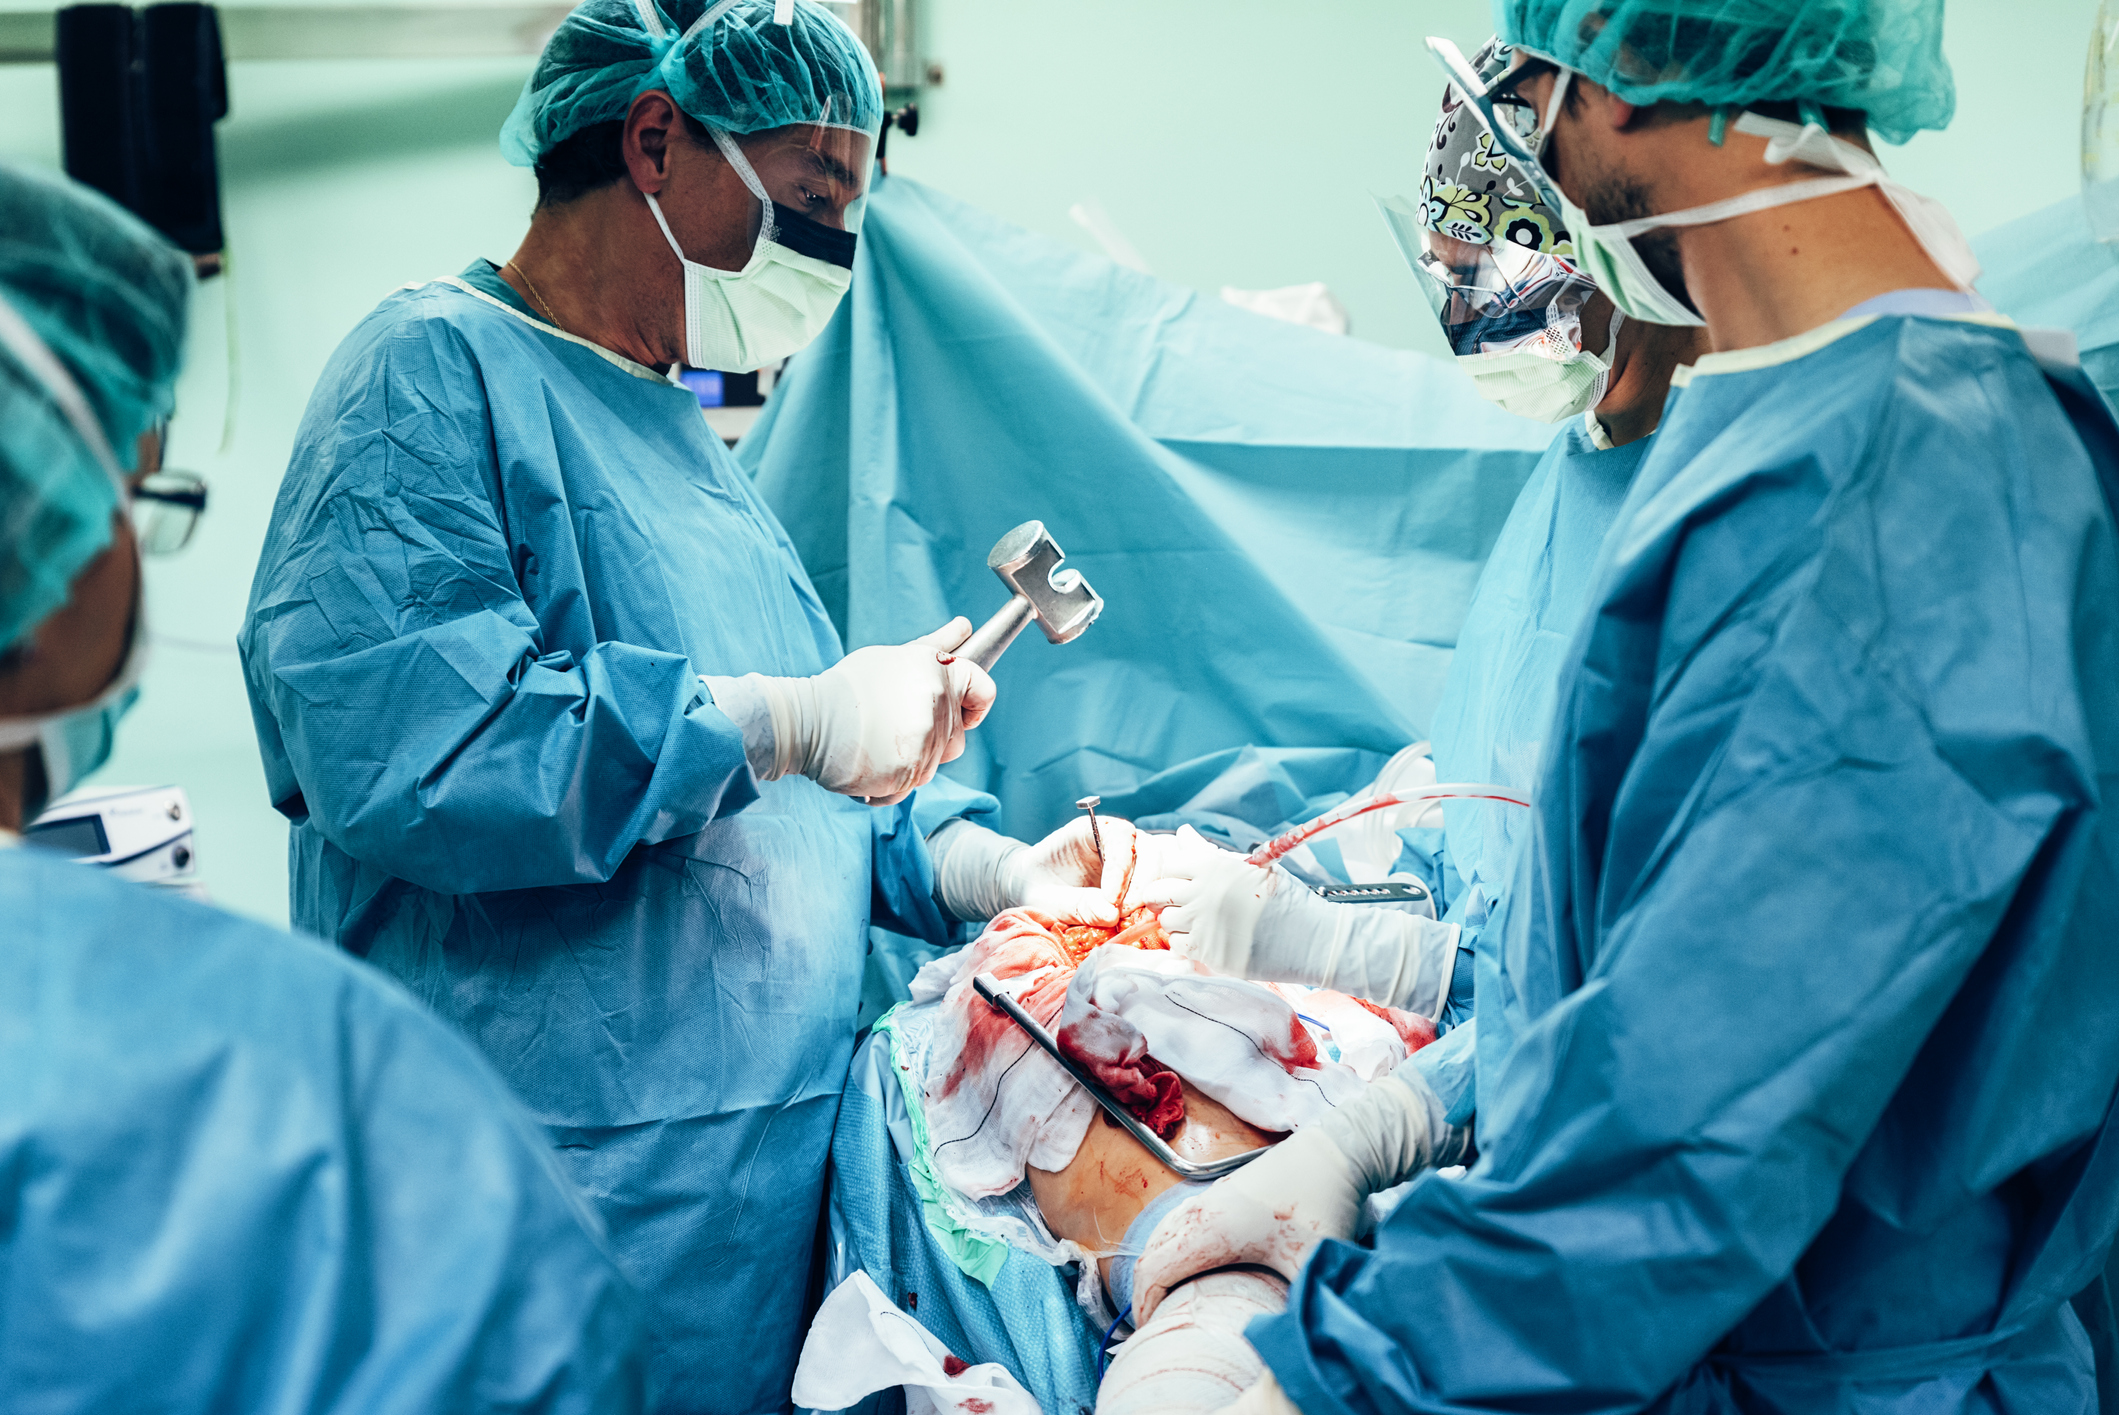 How to Become an Orthopedic Surgeon: Training, Licensing, and Certification Requirements